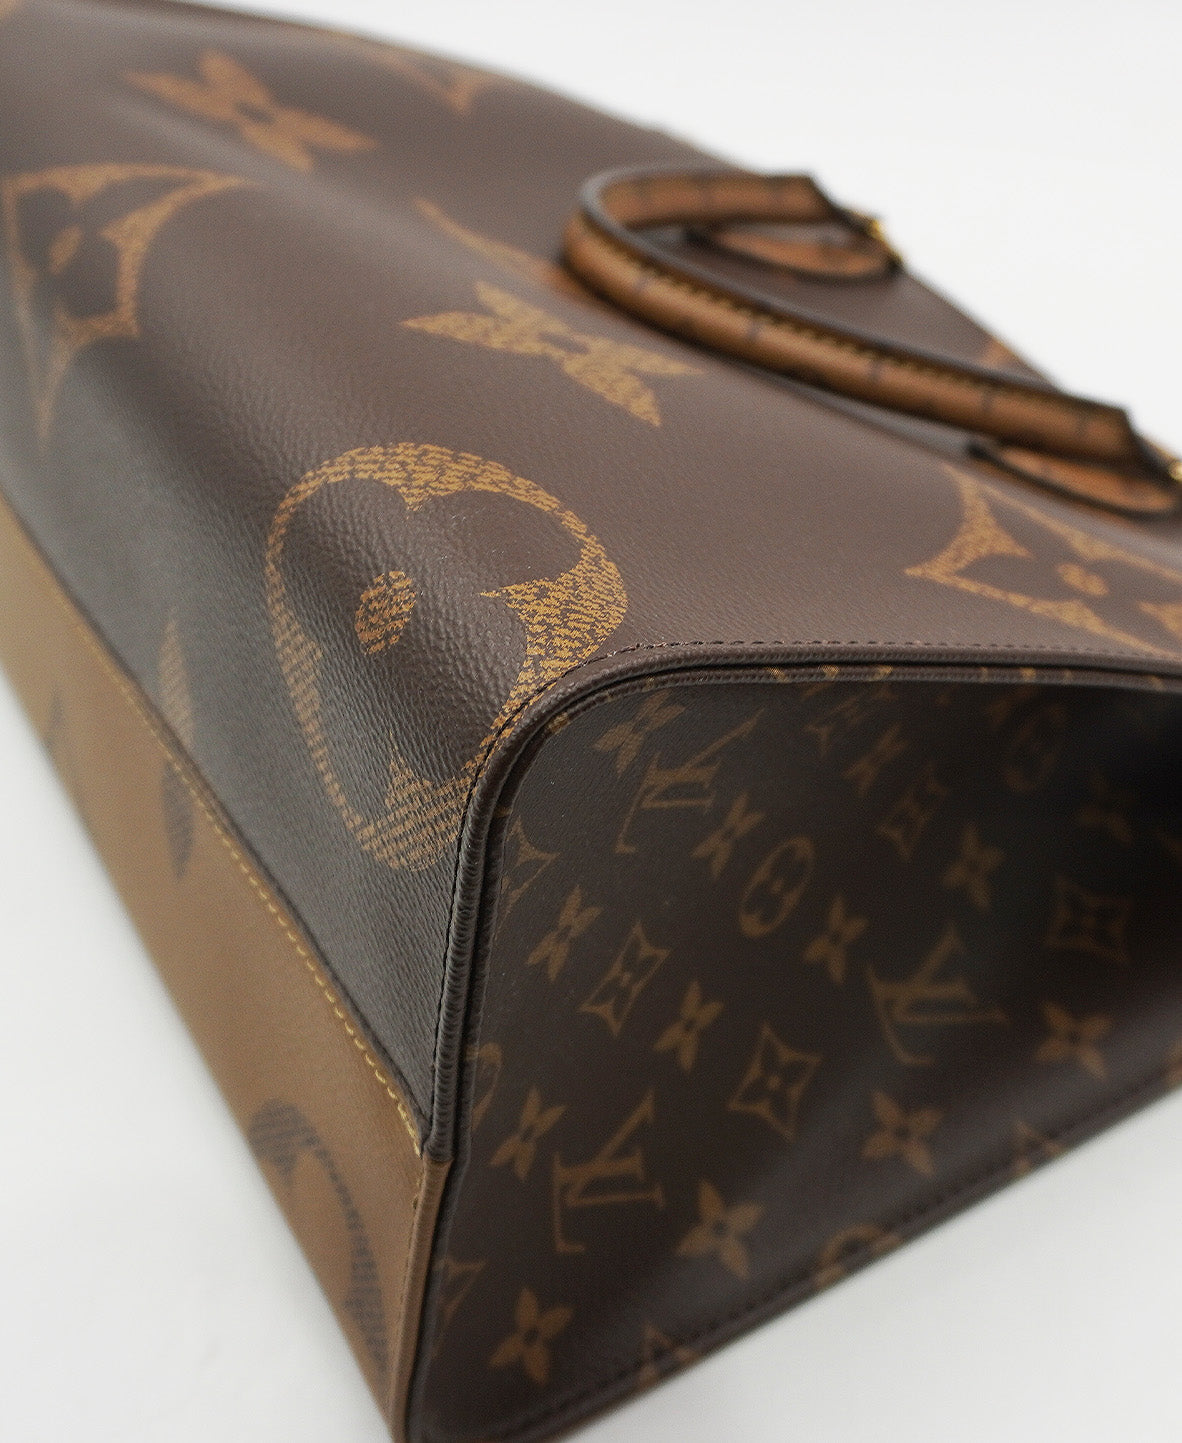 Louis+Vuitton+On+The+Go+Tote+MM+Brown+Monogram+Reverse+Leather for sale  online